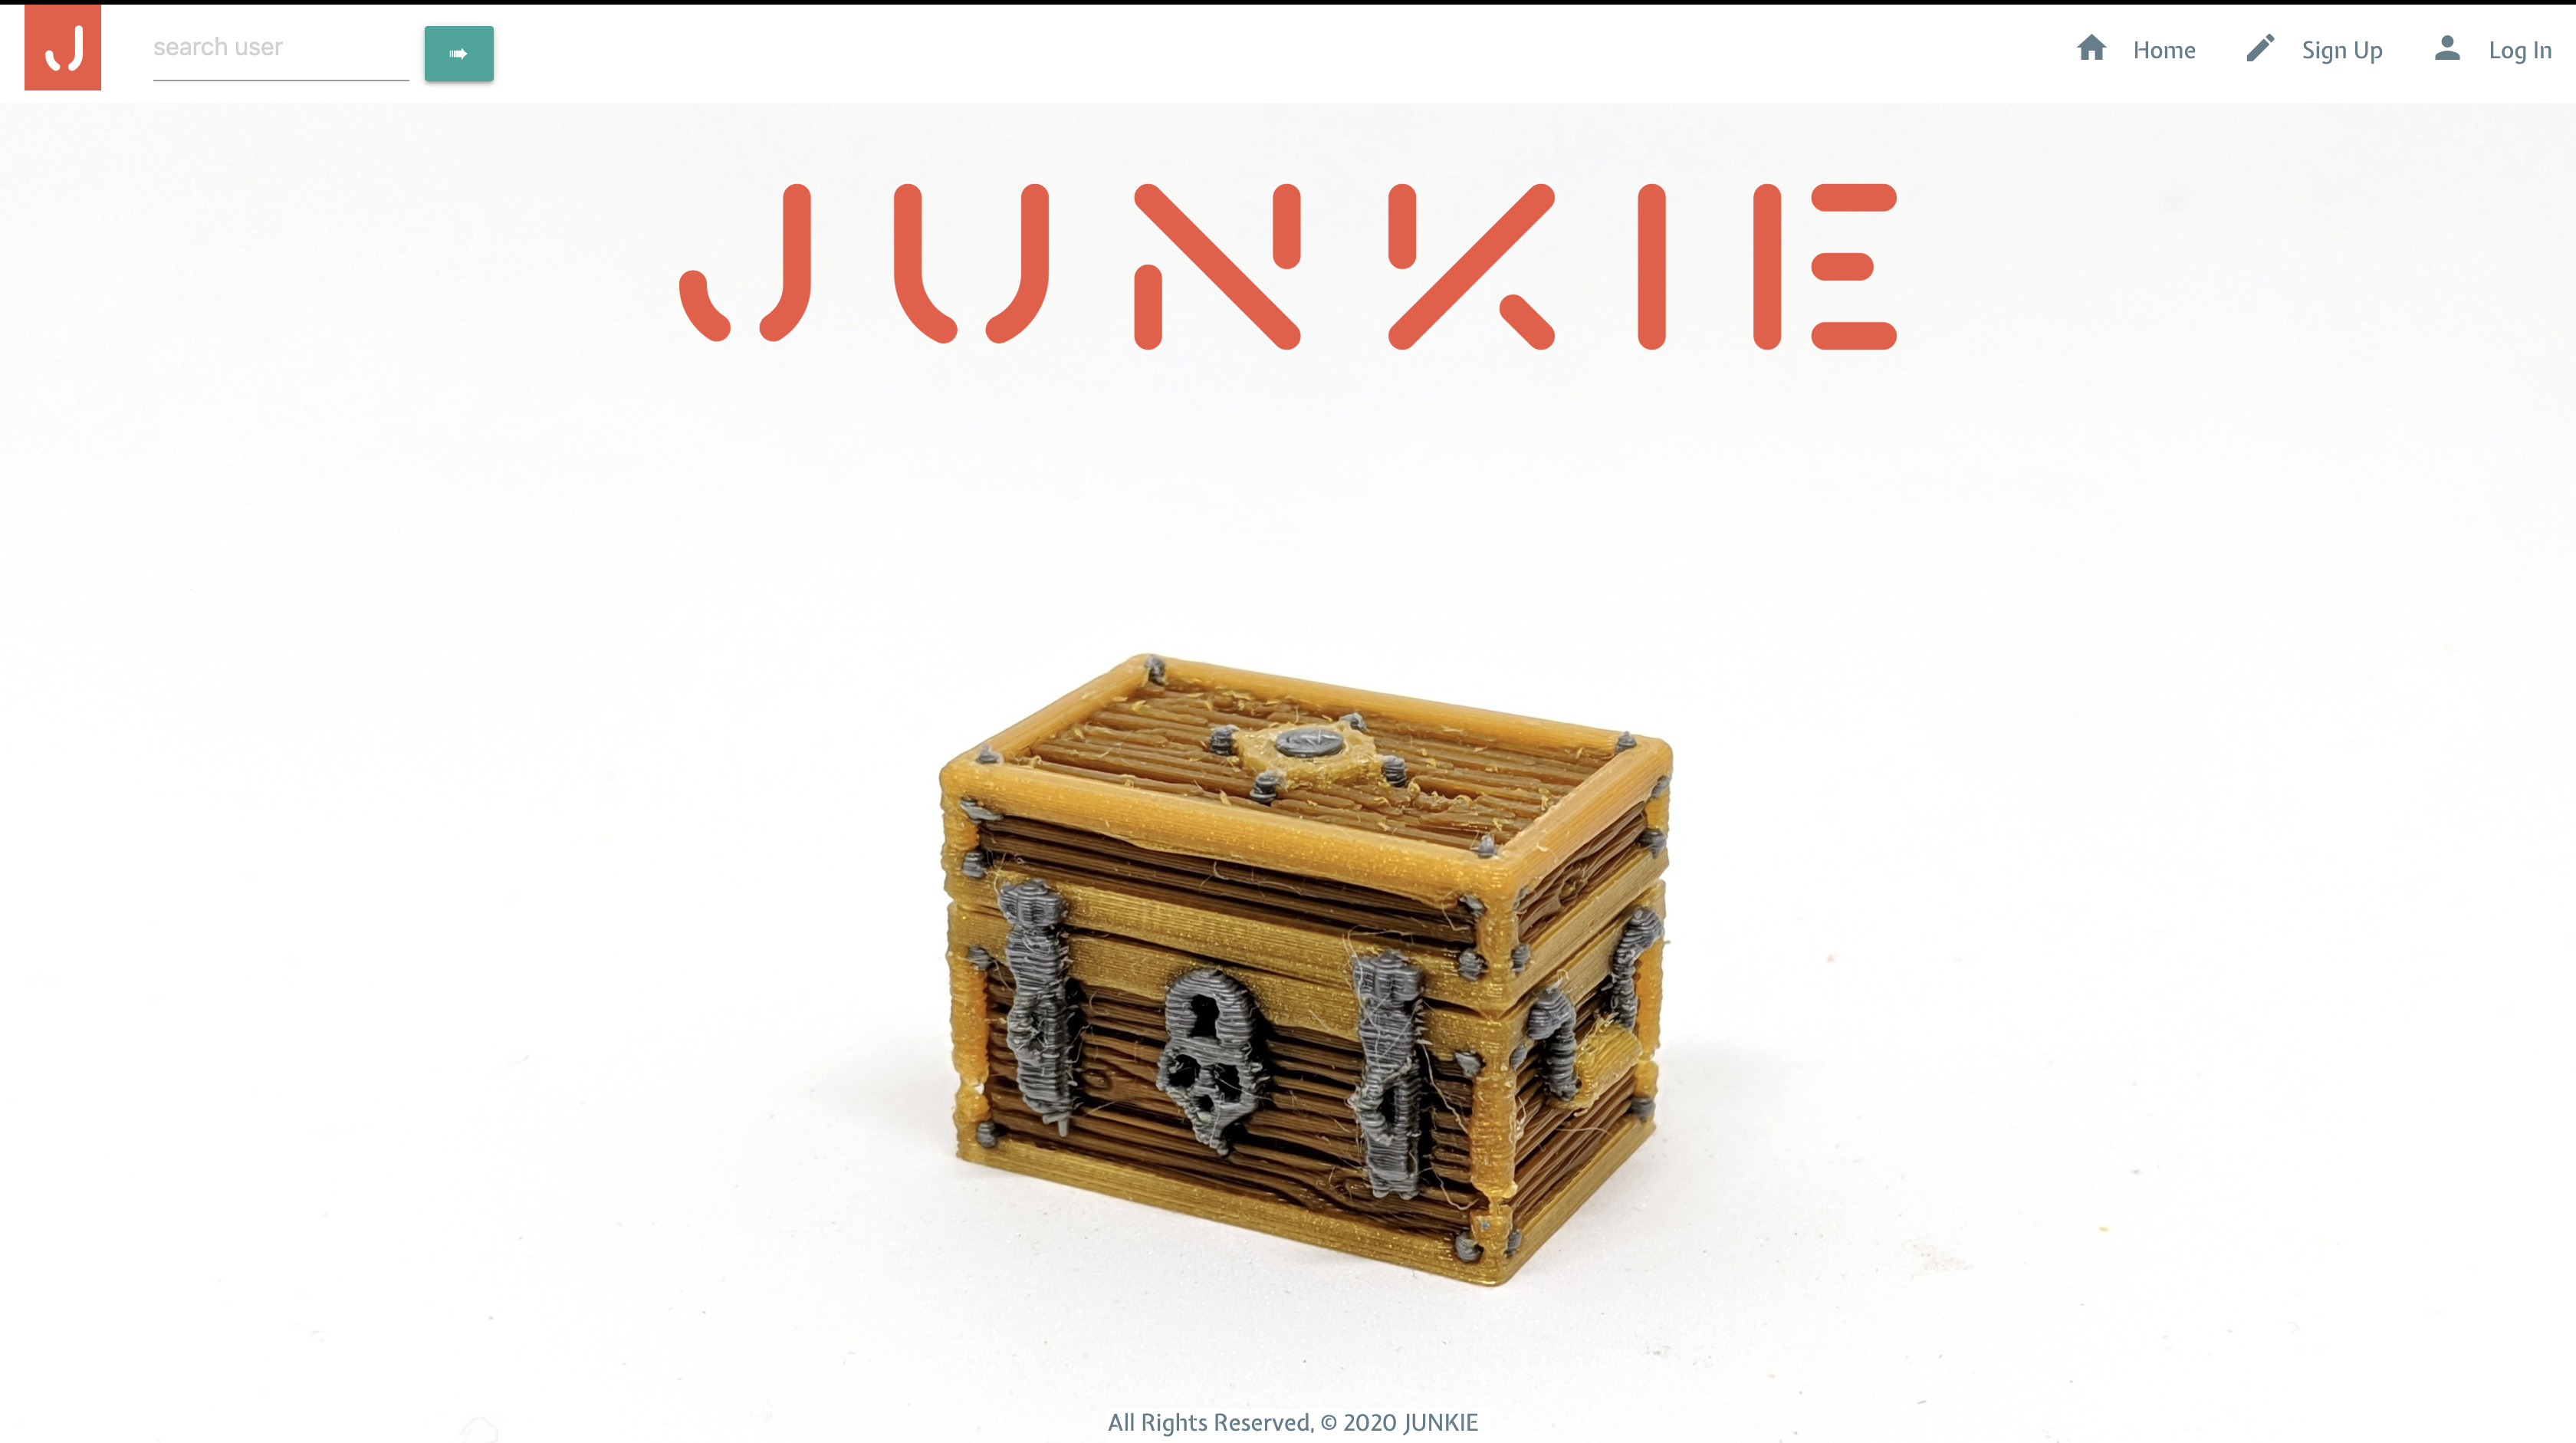 <h2>Junkie App</h2> - A place where collectors can go to to input their collection, organize, share, buy and sell thier 
                    items with other likeminded collectors. Today we are starting with Vinyl Record junkies, tomorrow it will be comics and in the 
                    future you will have every collection. You can input the album information into your collection, including grade and description. 
                    Organize your collection and search your collection. Other users can comment on your collection. Once you find a better vinyl then 
                    the one you have you can put that one up for sale on our Junkie Market. <br> <a target="_blank" href="https://github.com/adibfazli/junkie">Github Link</a>